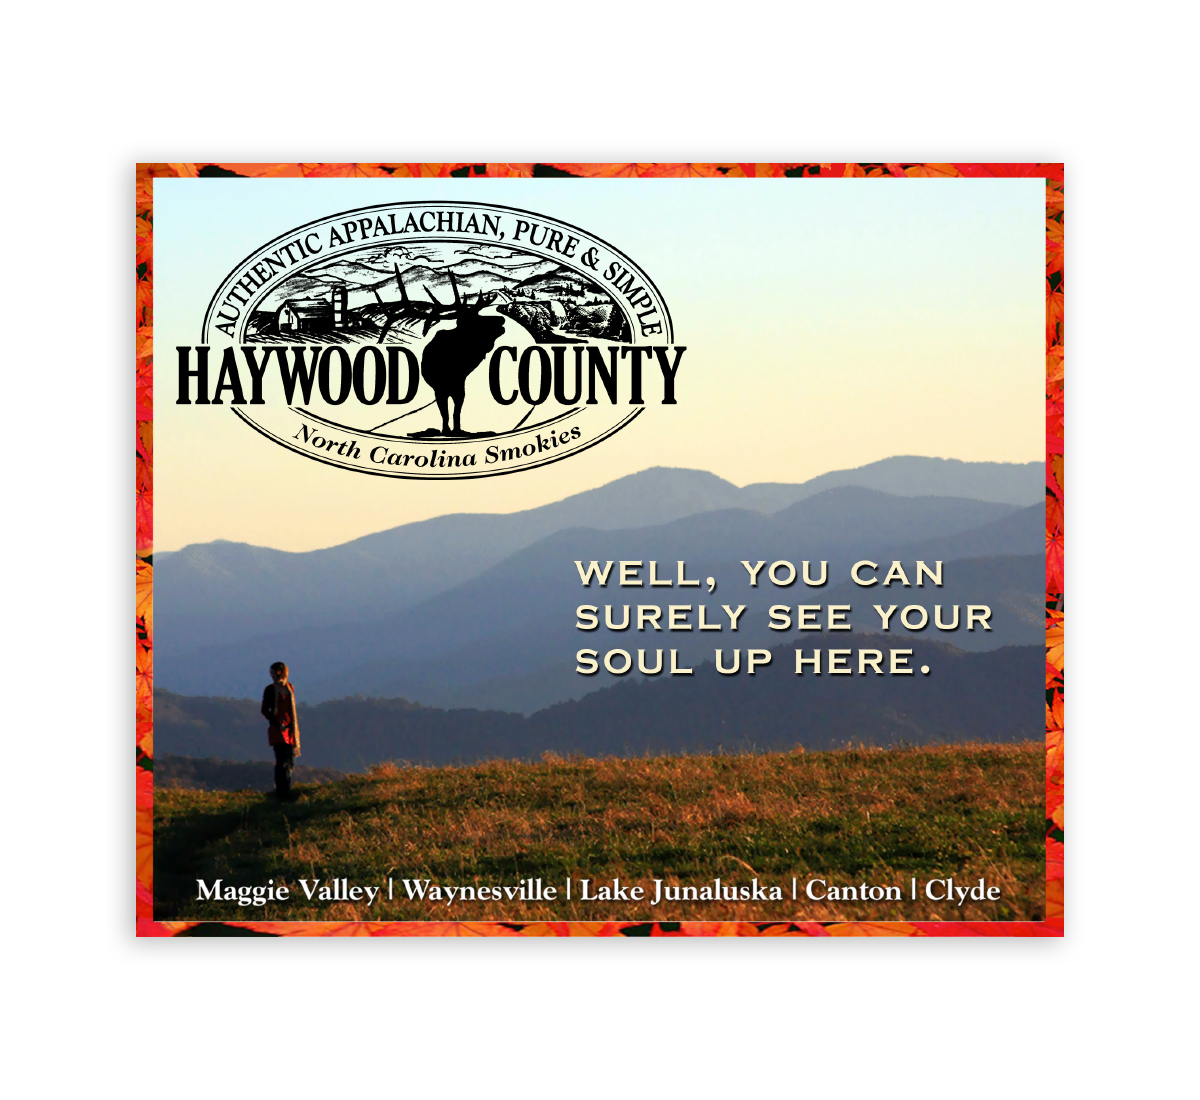 advertisement for haywood county